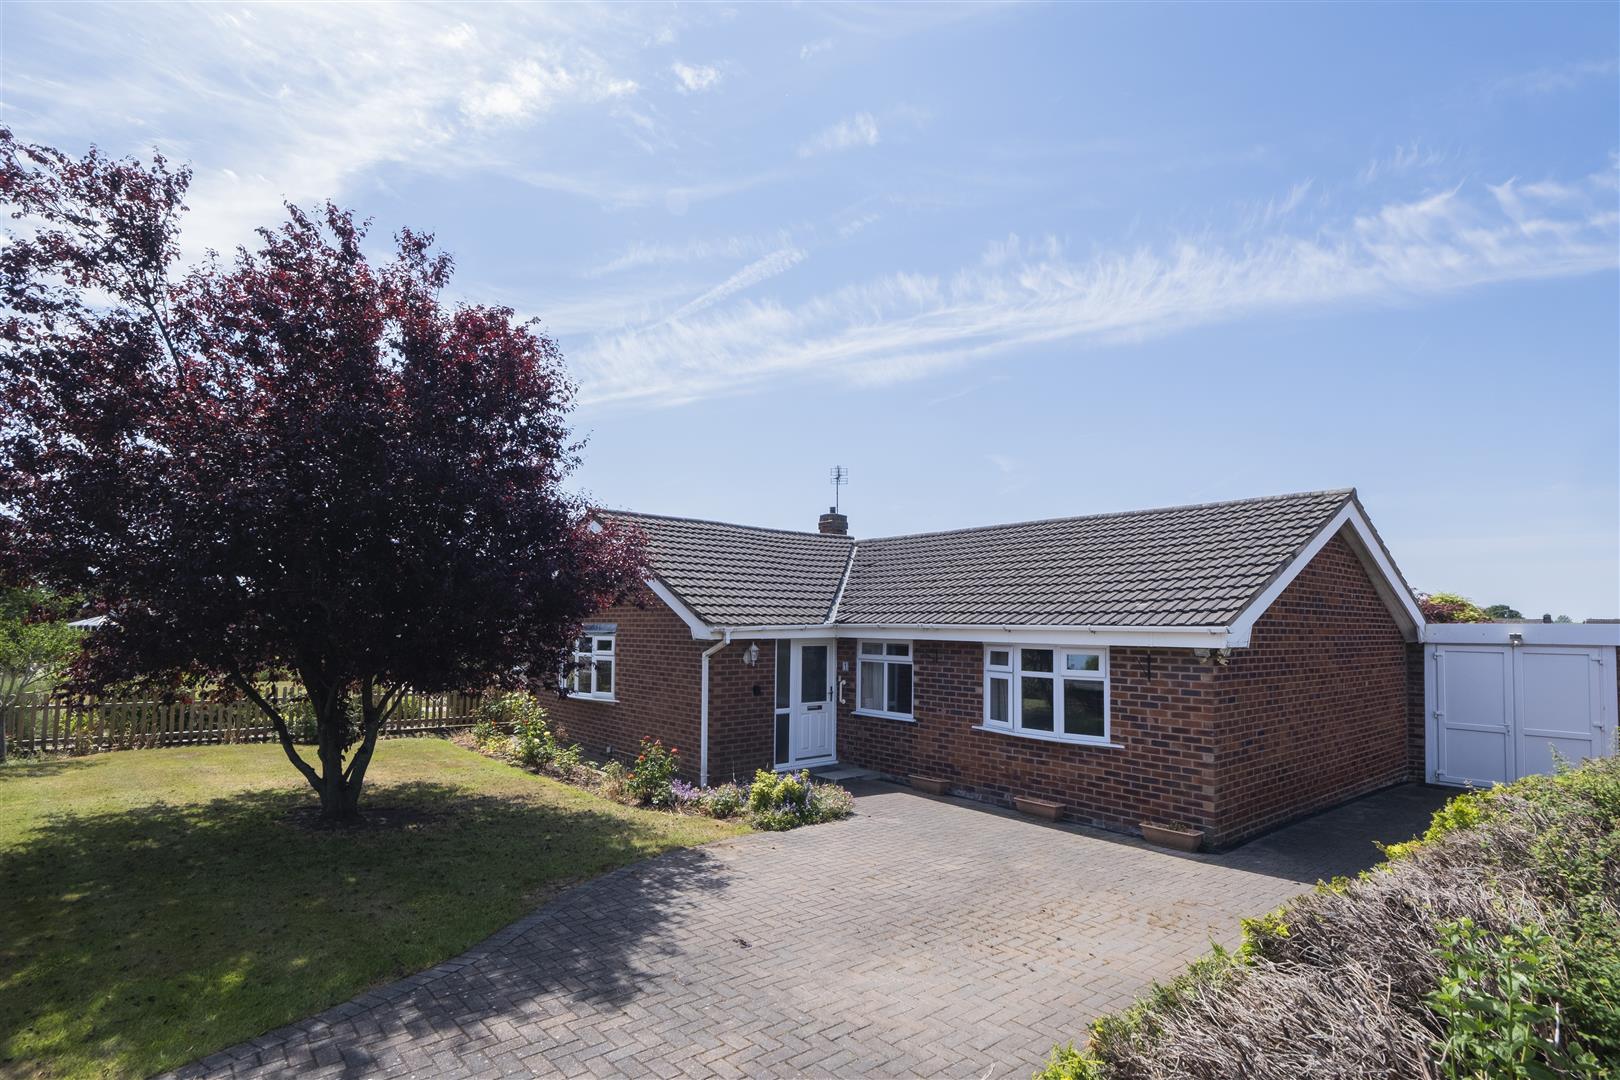 3 bedroom  Detached Bungalow for Sale in Northwich